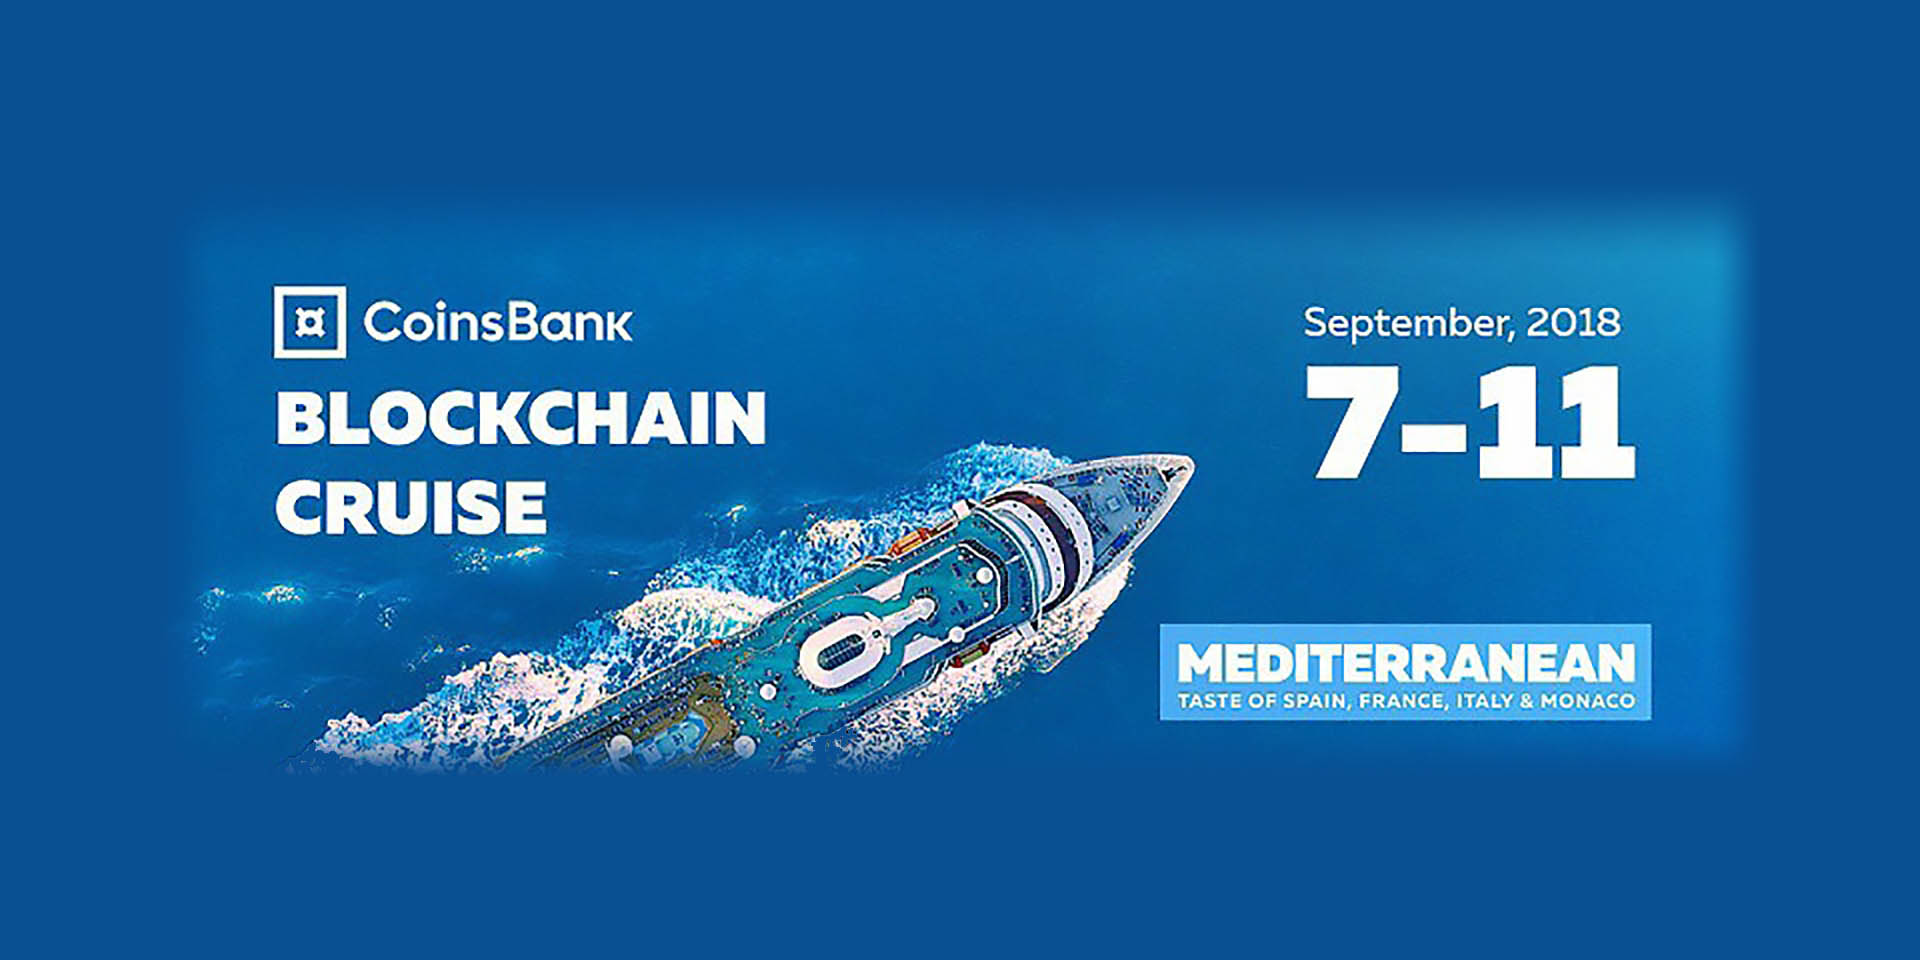 John McAfee Is to Give a Speech at CoinsBank Blockchain Cruise in September